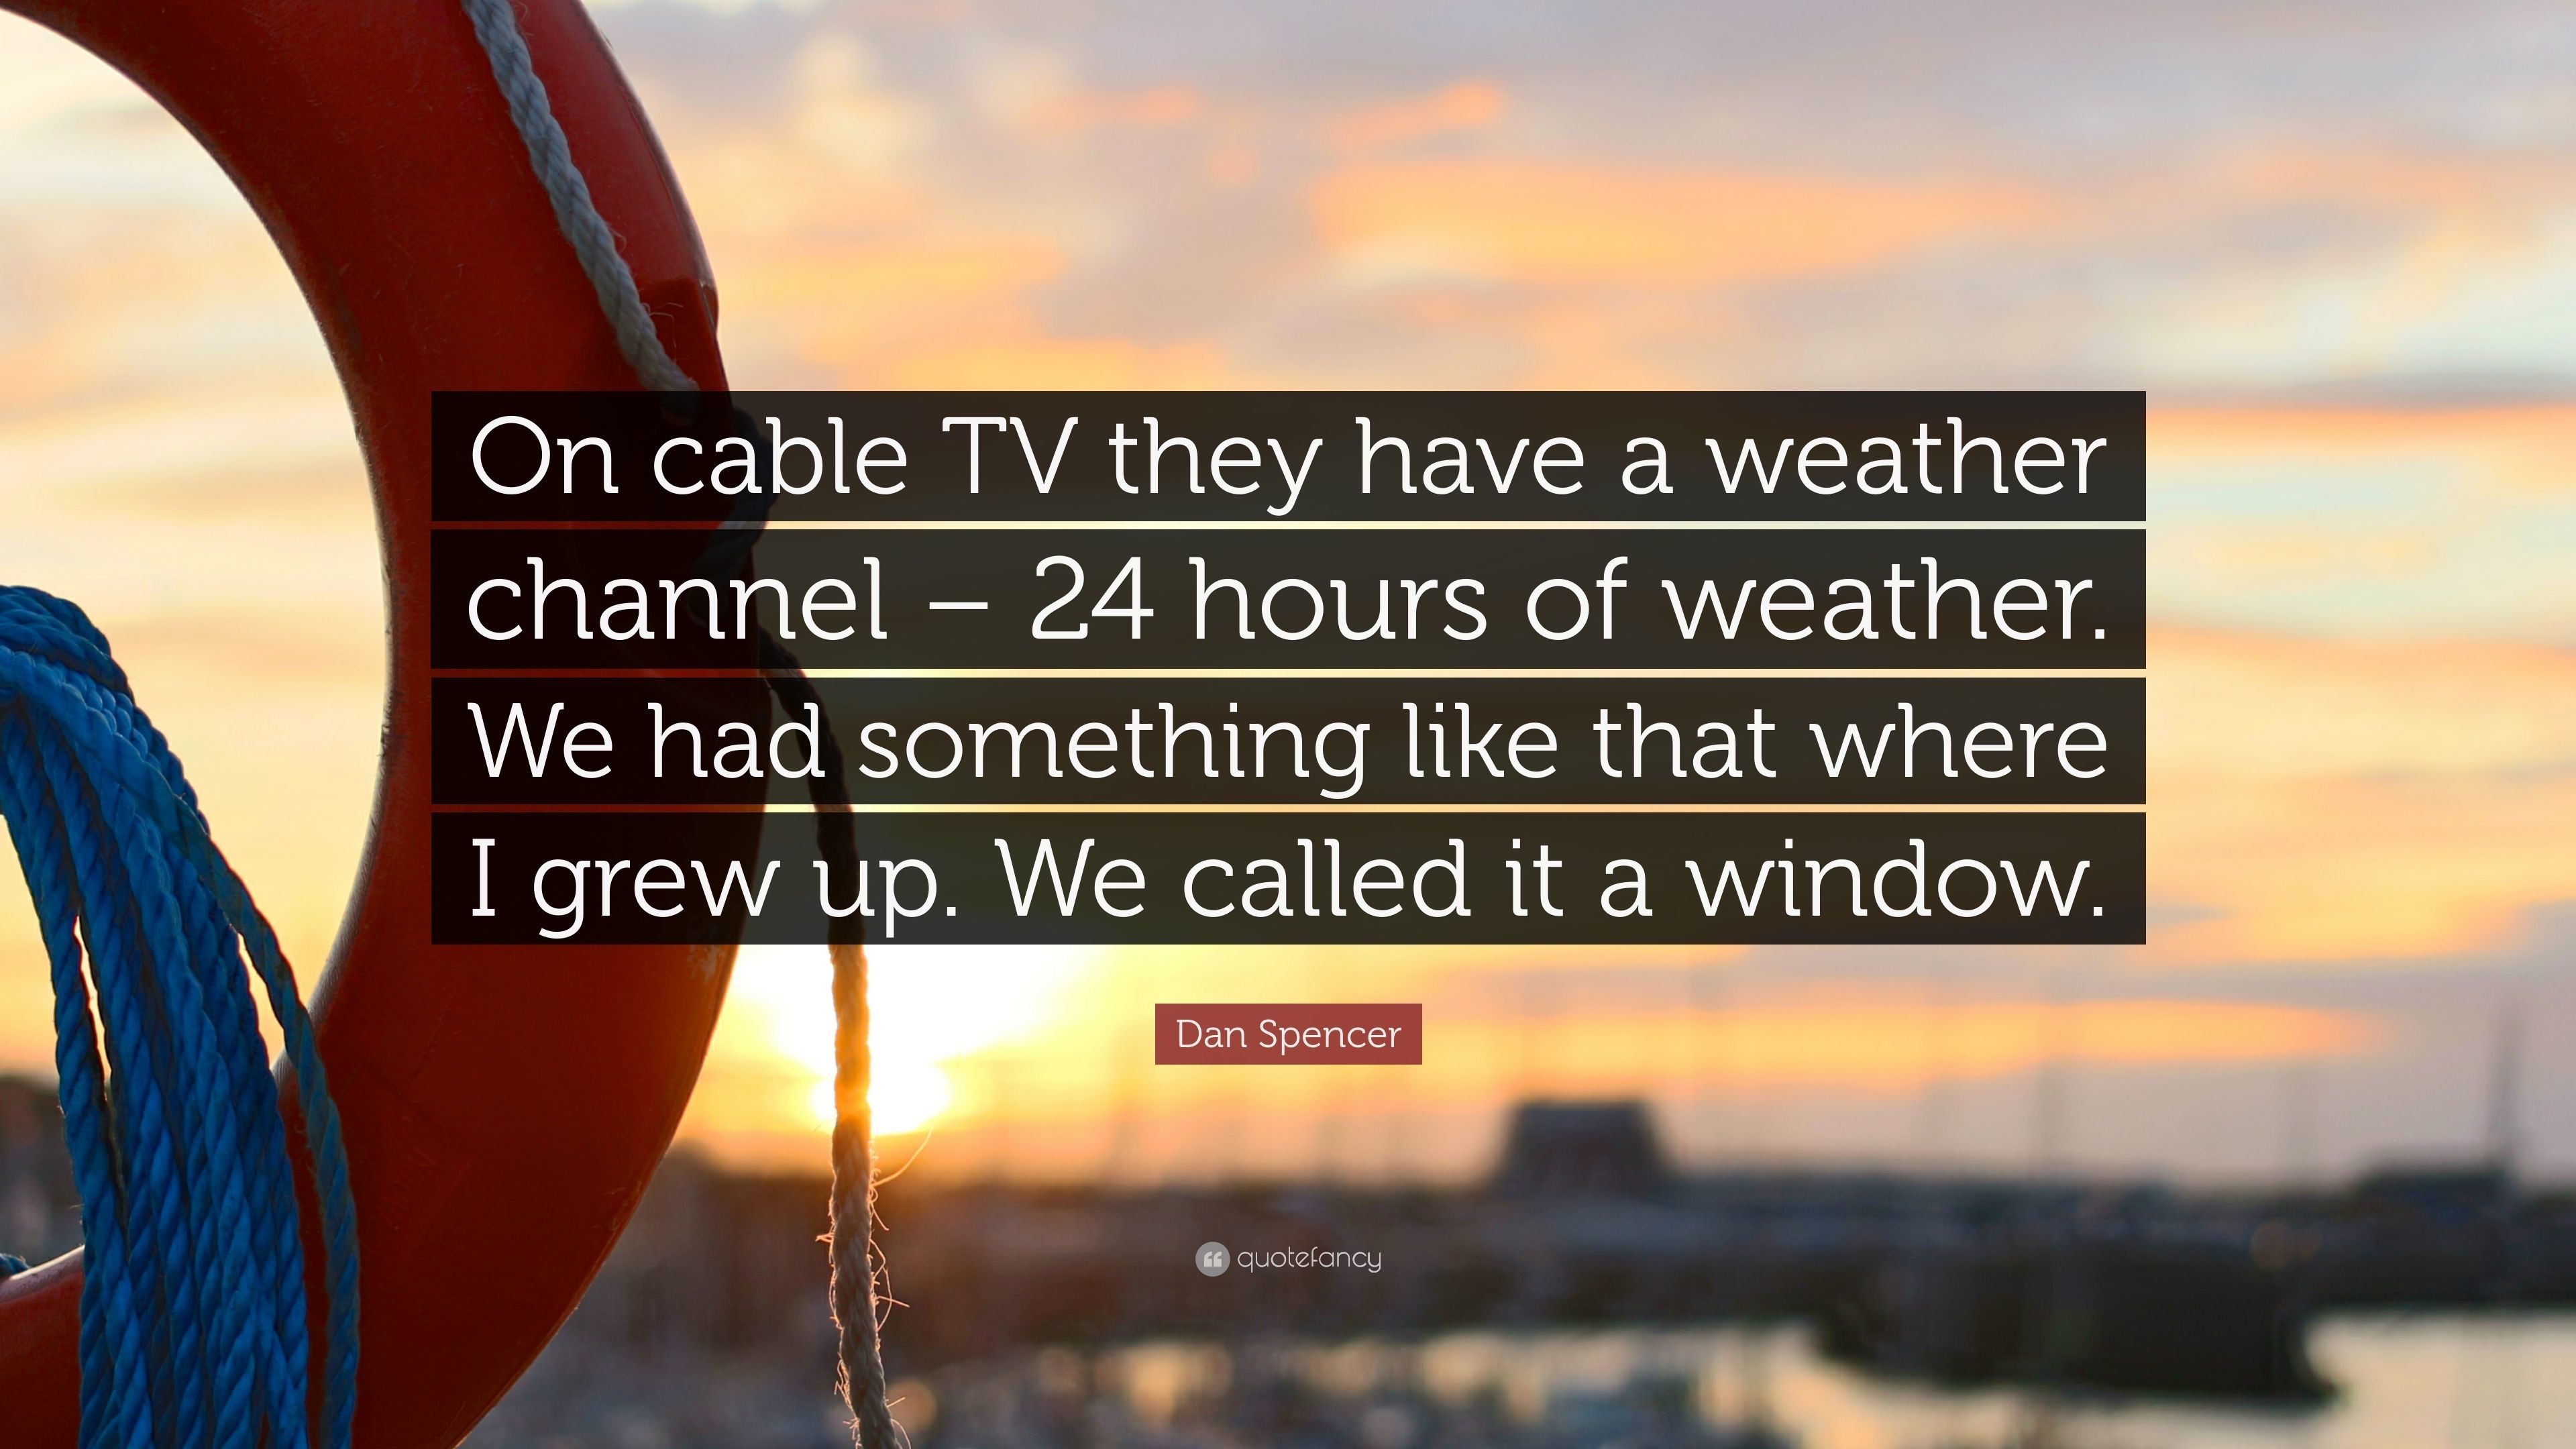 3840x2160 Dan Spencer Quote: “On cable TV they have a weather channel – 24 hours